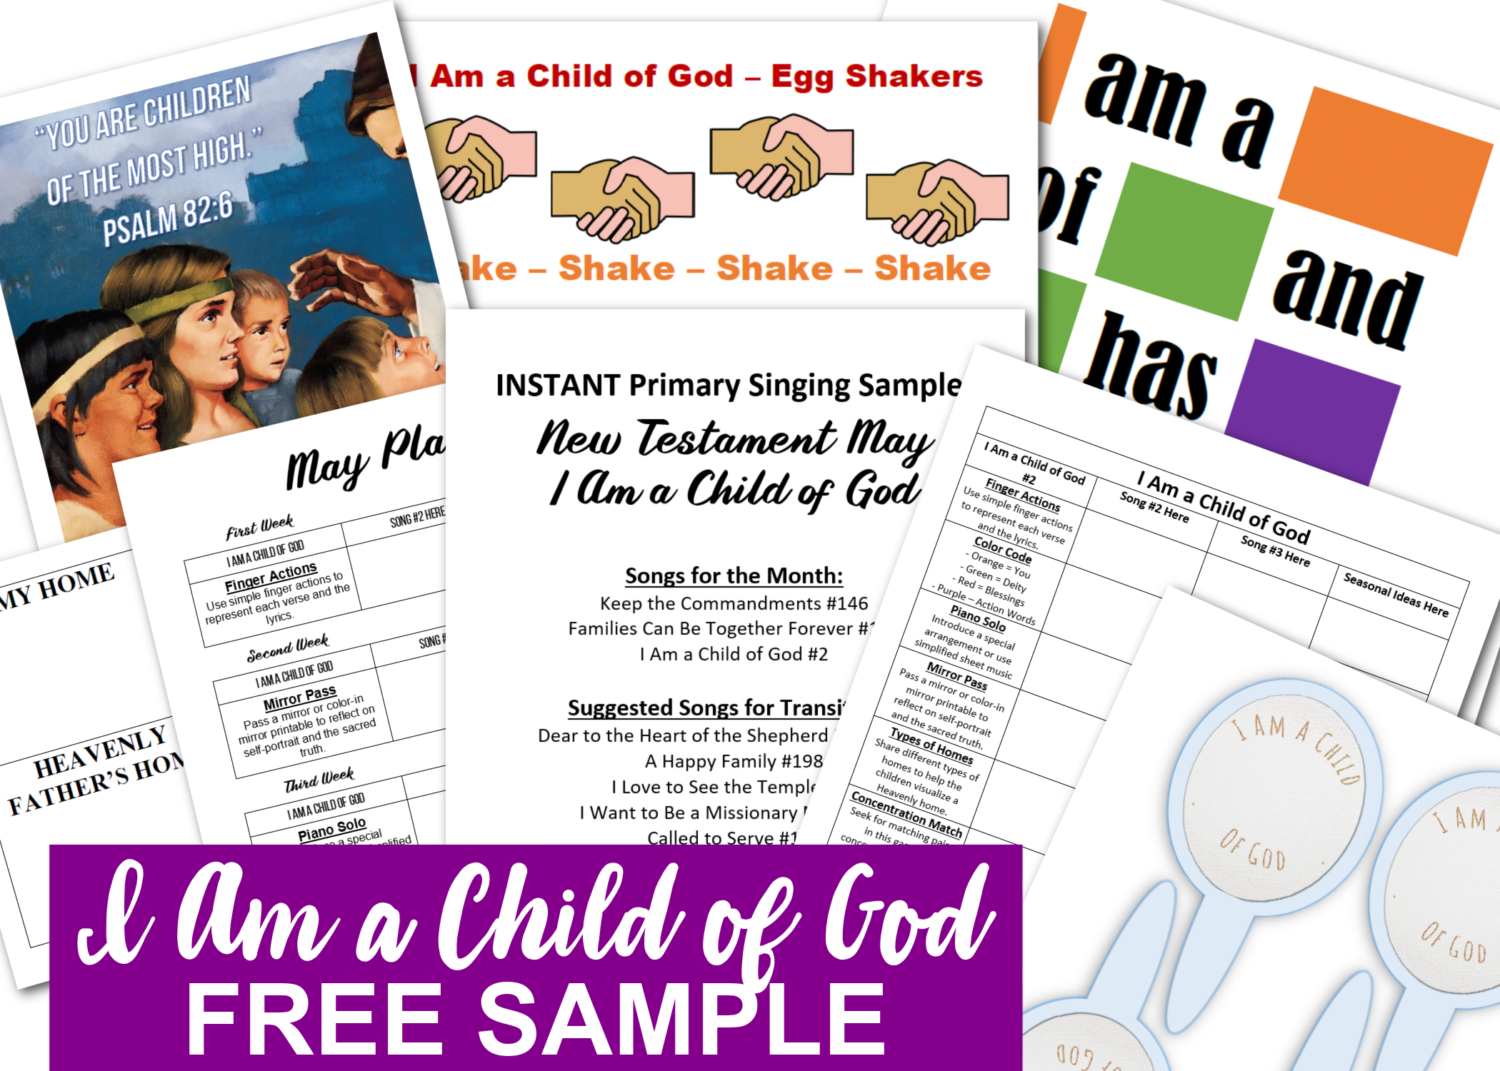 Join INSTANT Primary Singing Easy ideas for Music Leaders Instant I Am a Child of God Sample